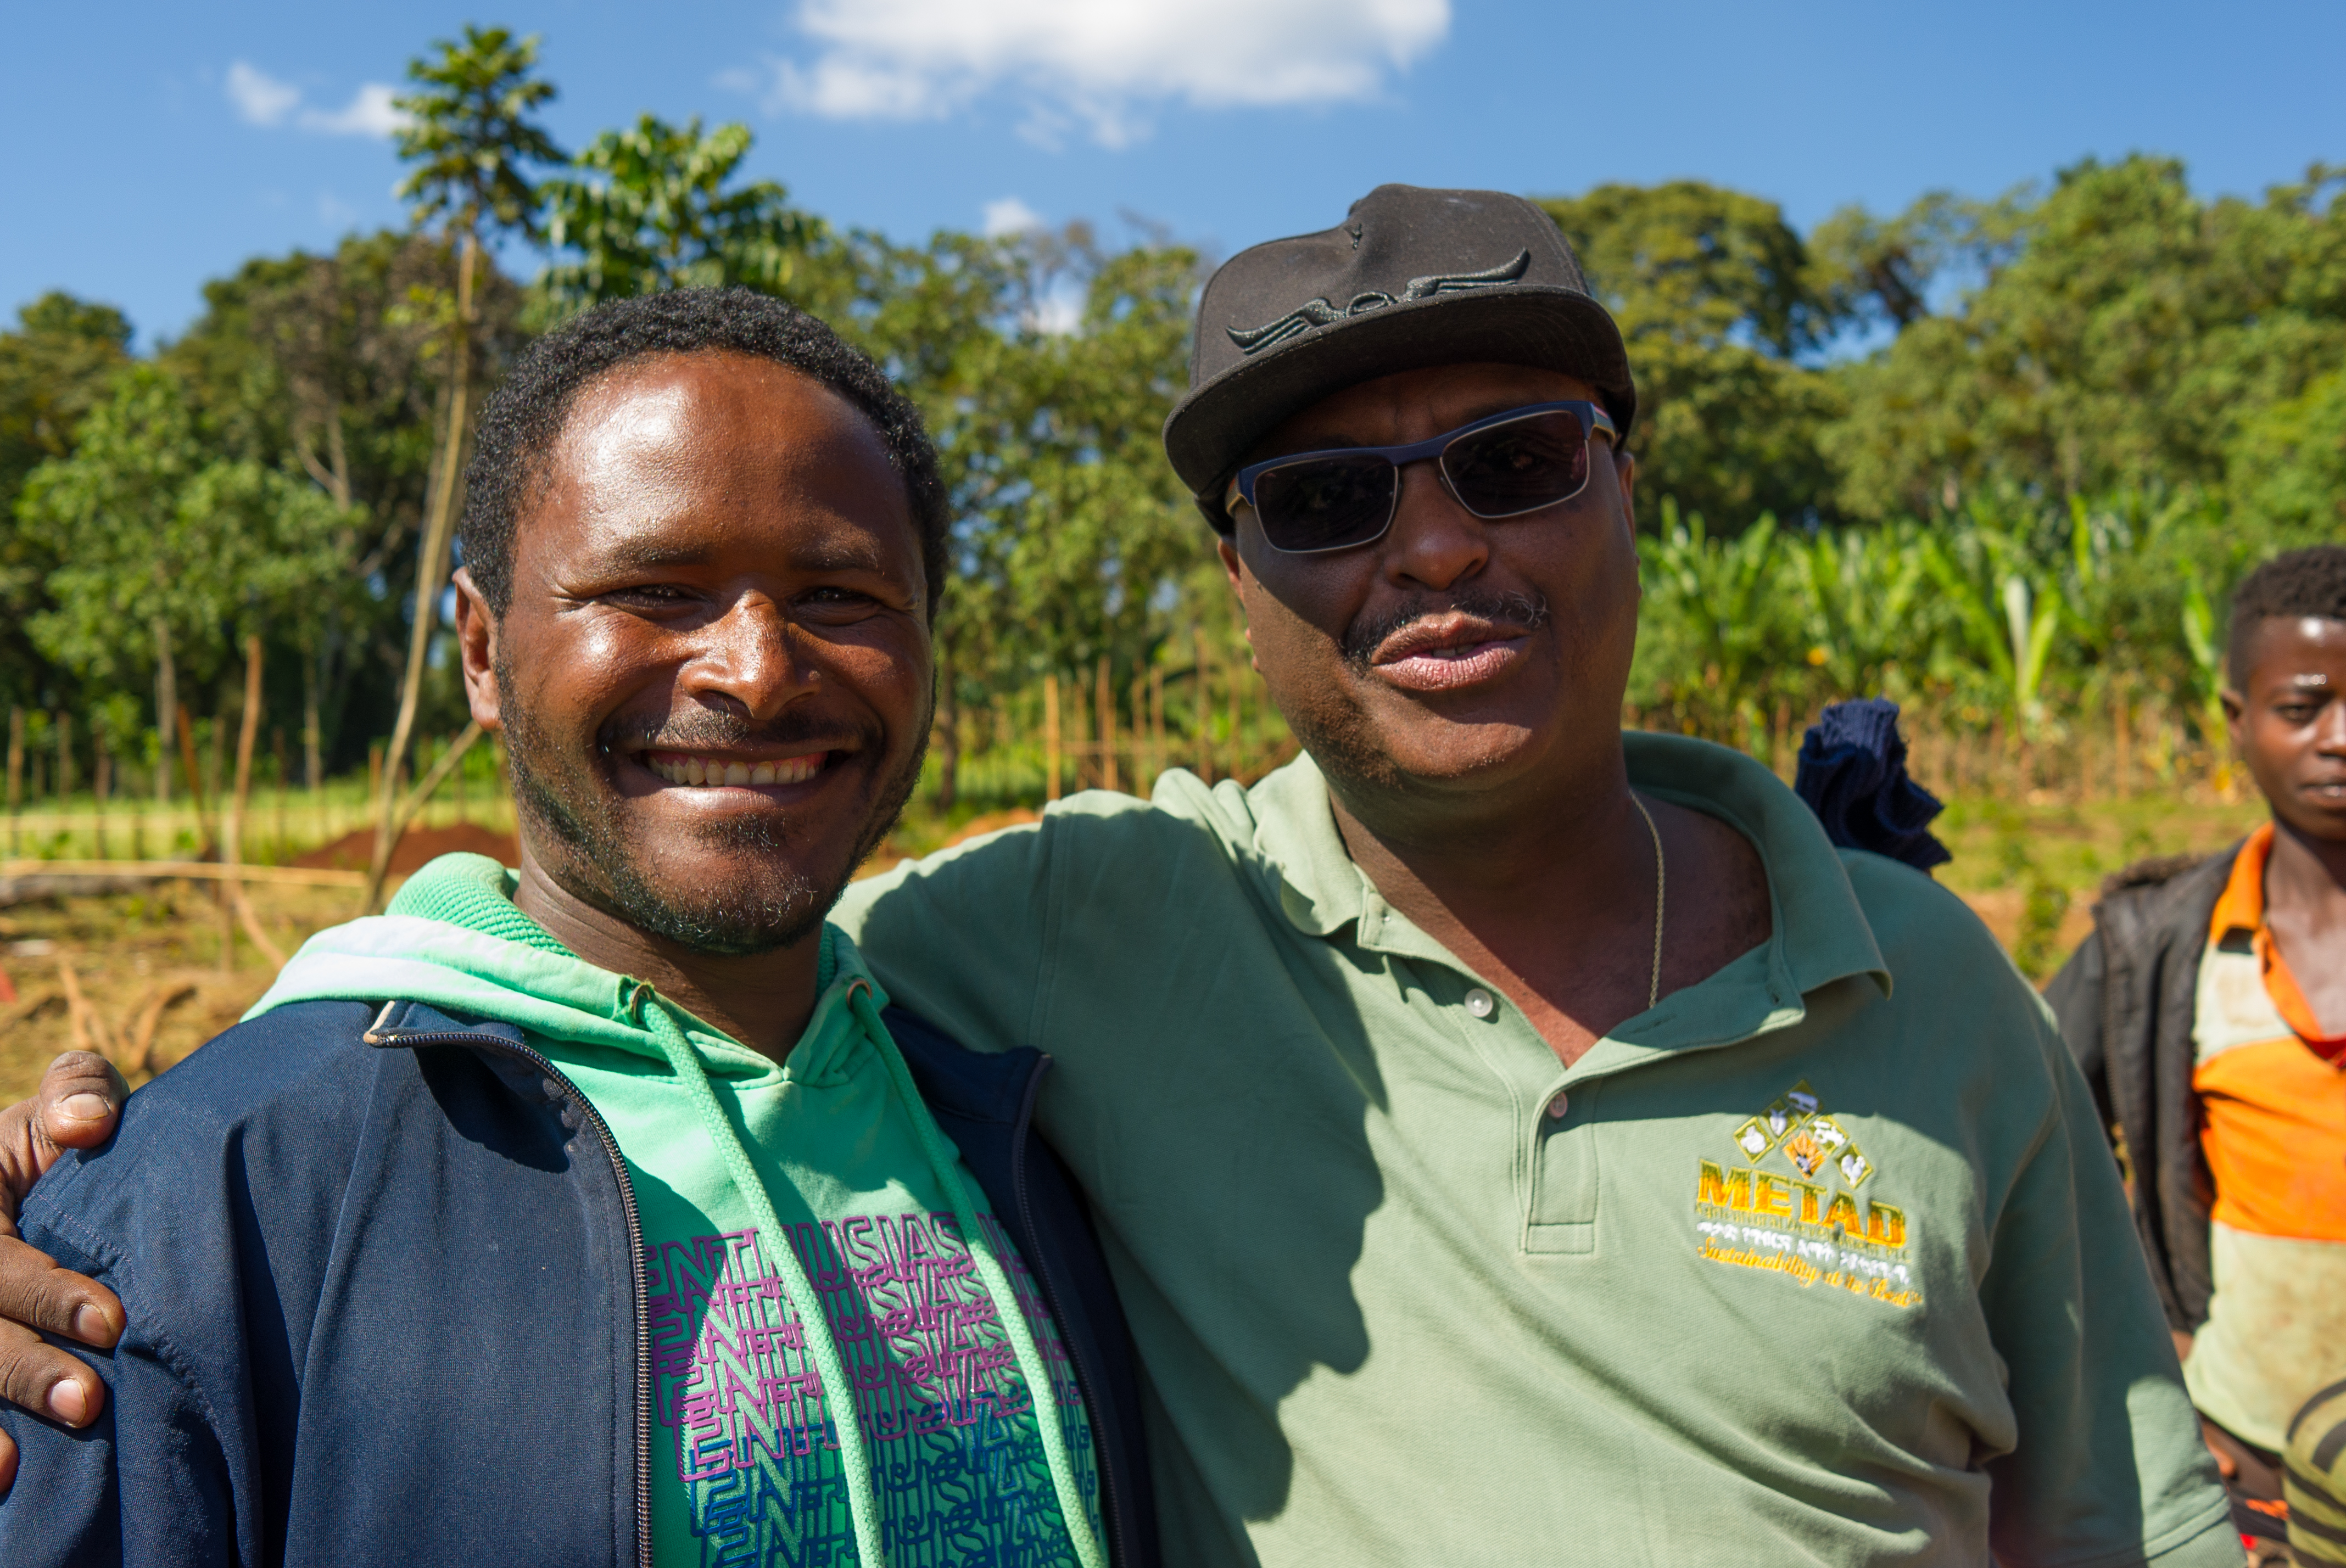 Aman Adinew (owner of Metad) and Etassu who is the lead farmer in Bente Nenqa